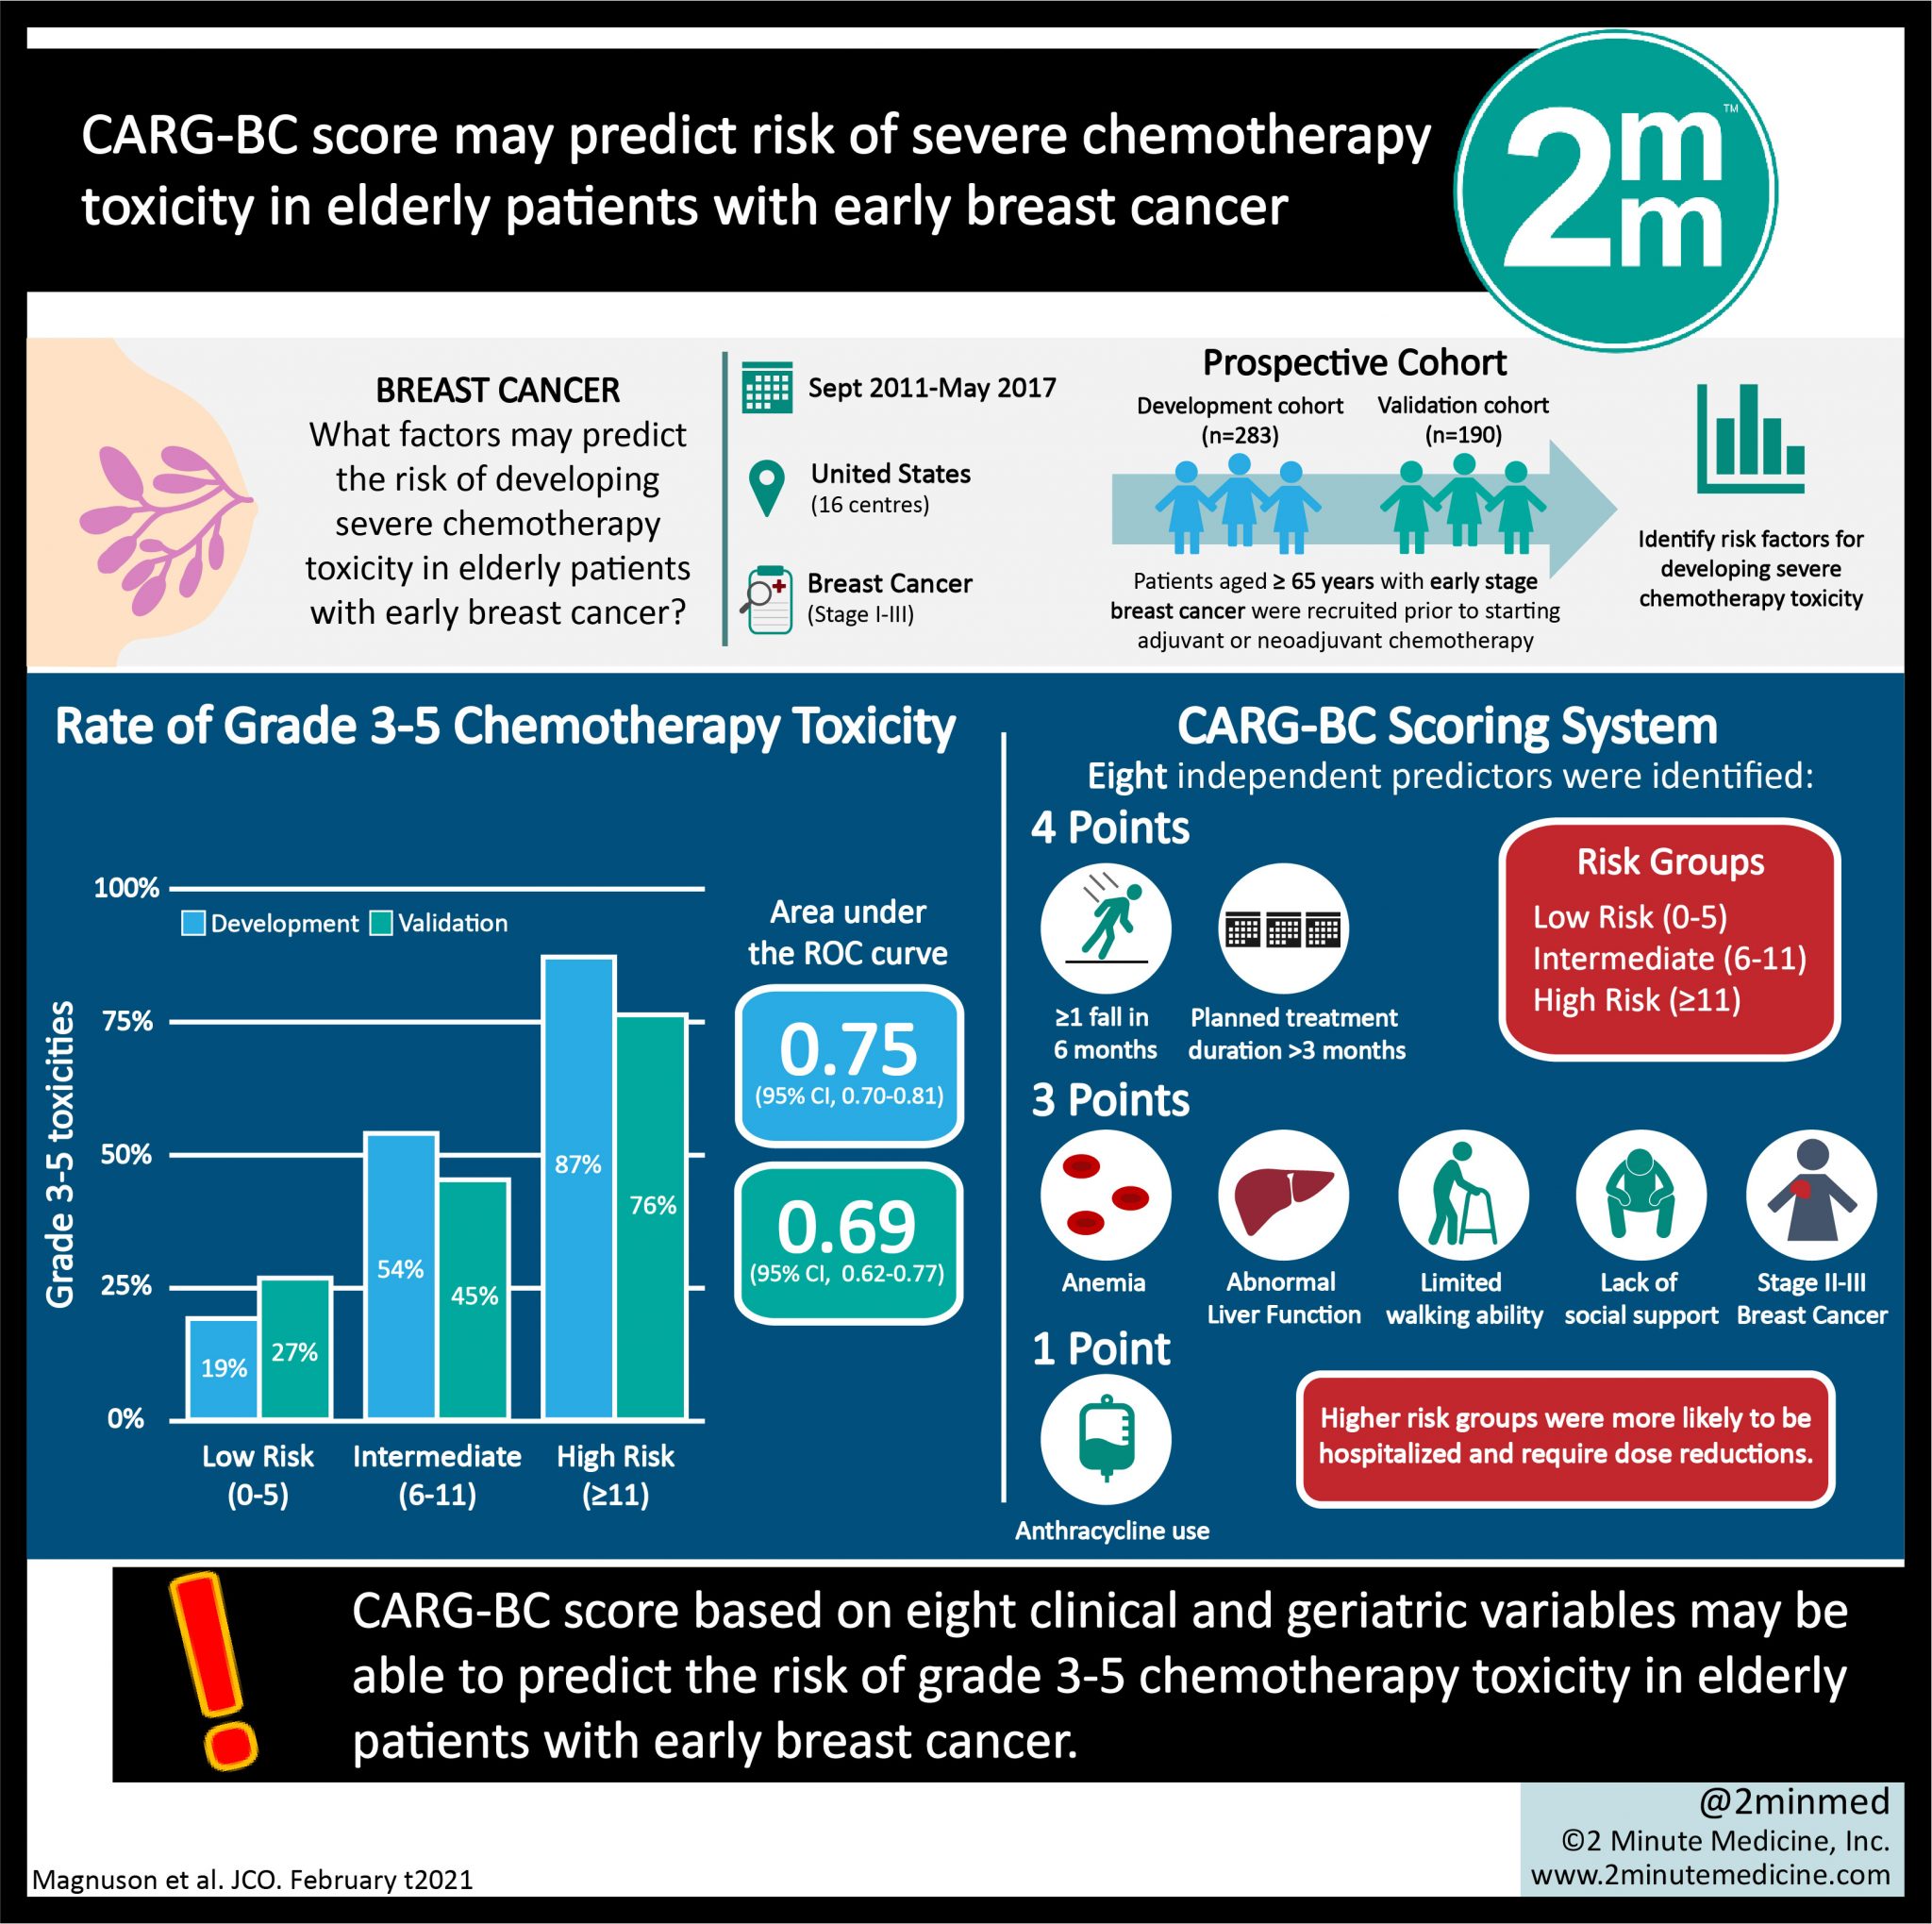 #VisualAbstract: CARG-BC score may predict risk of severe chemotherapy ...